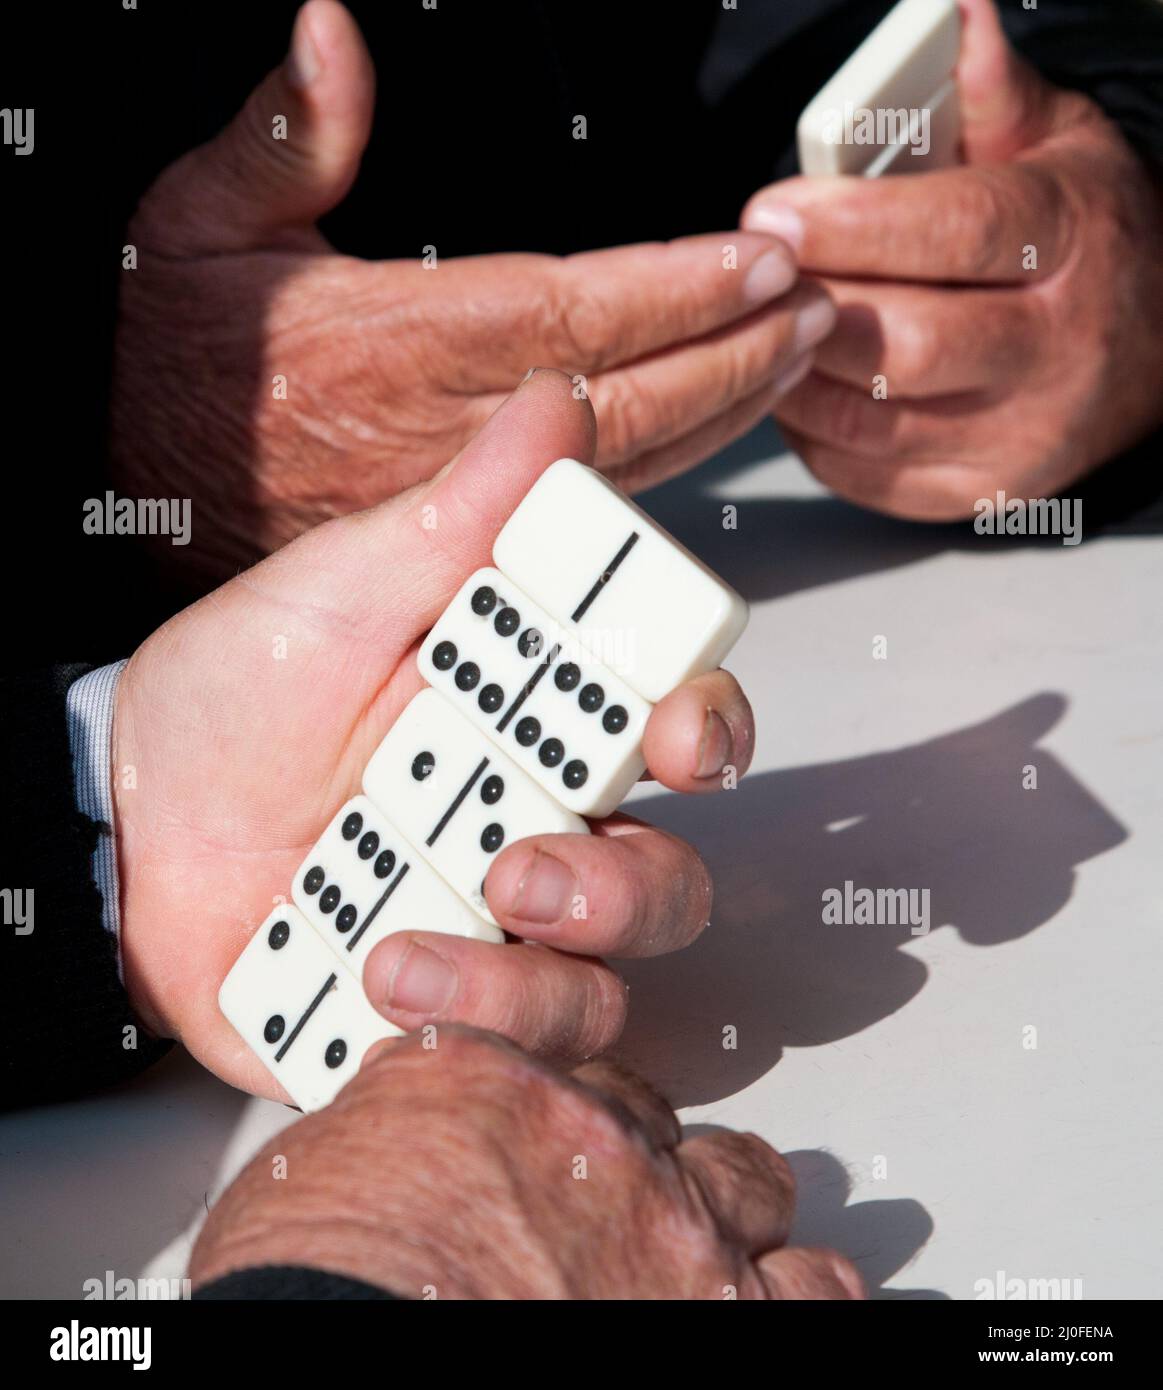 Mature retiree adults playing domino game for leisure Stock Photo